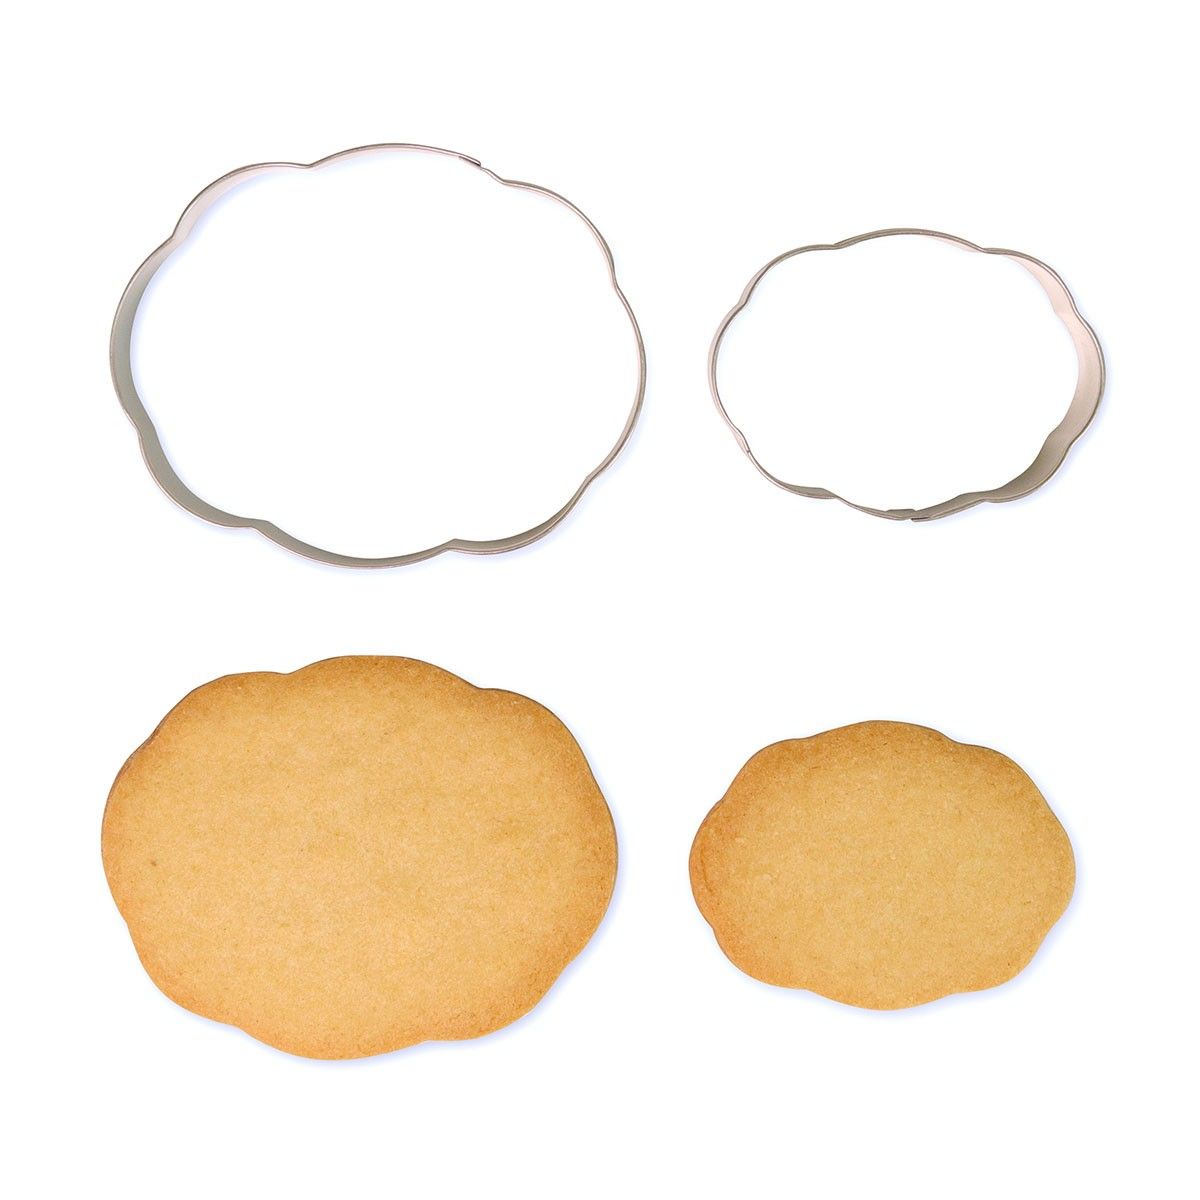 Rounded Plaque Cookie Cutter - Set of 2